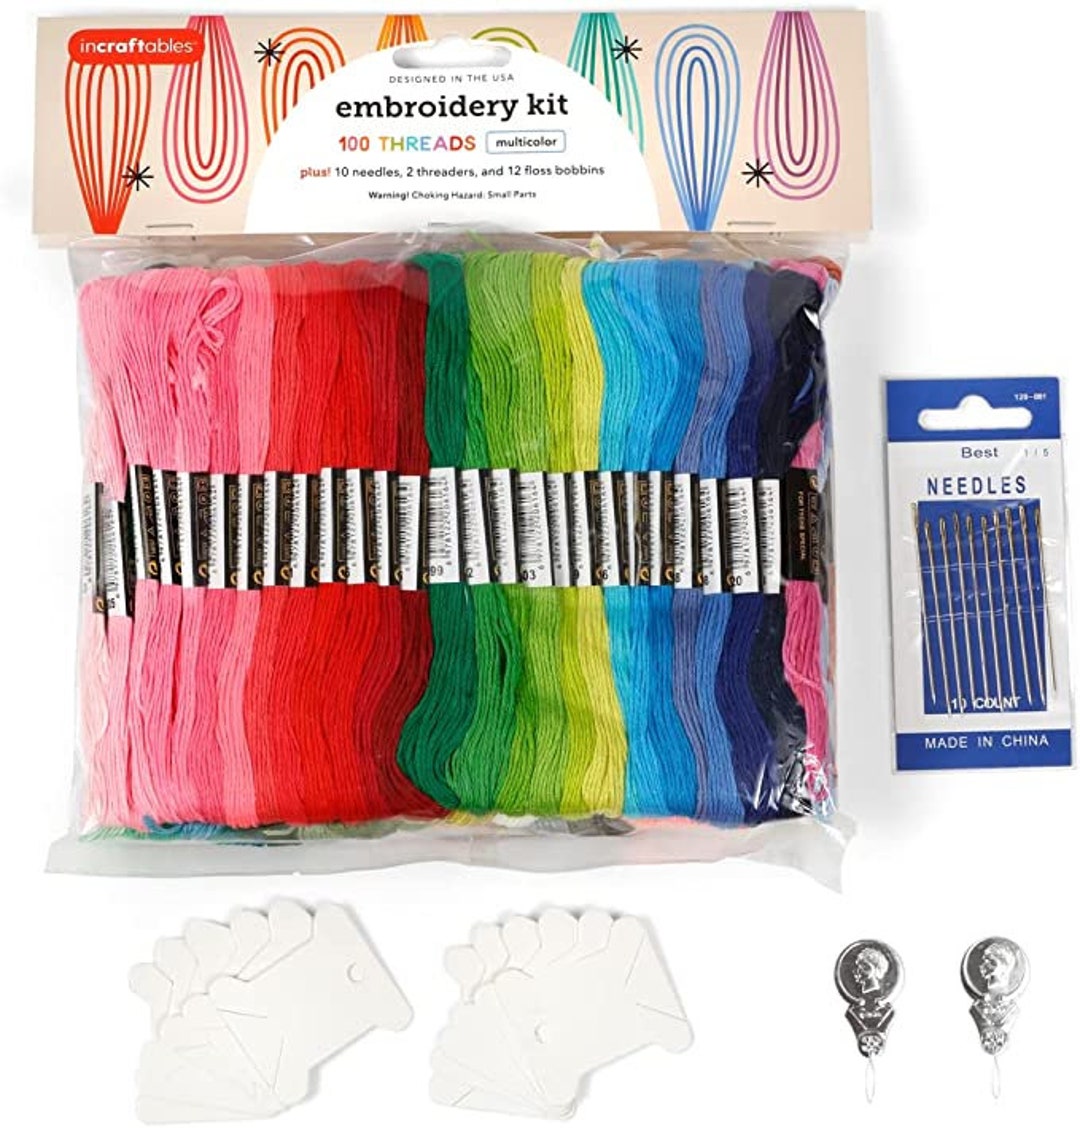 Incraftables Embroidery Thread for Bracelets 100pcs Friendship Bracelets String Making. Embroidery Floss Kit W/Needles Threaders